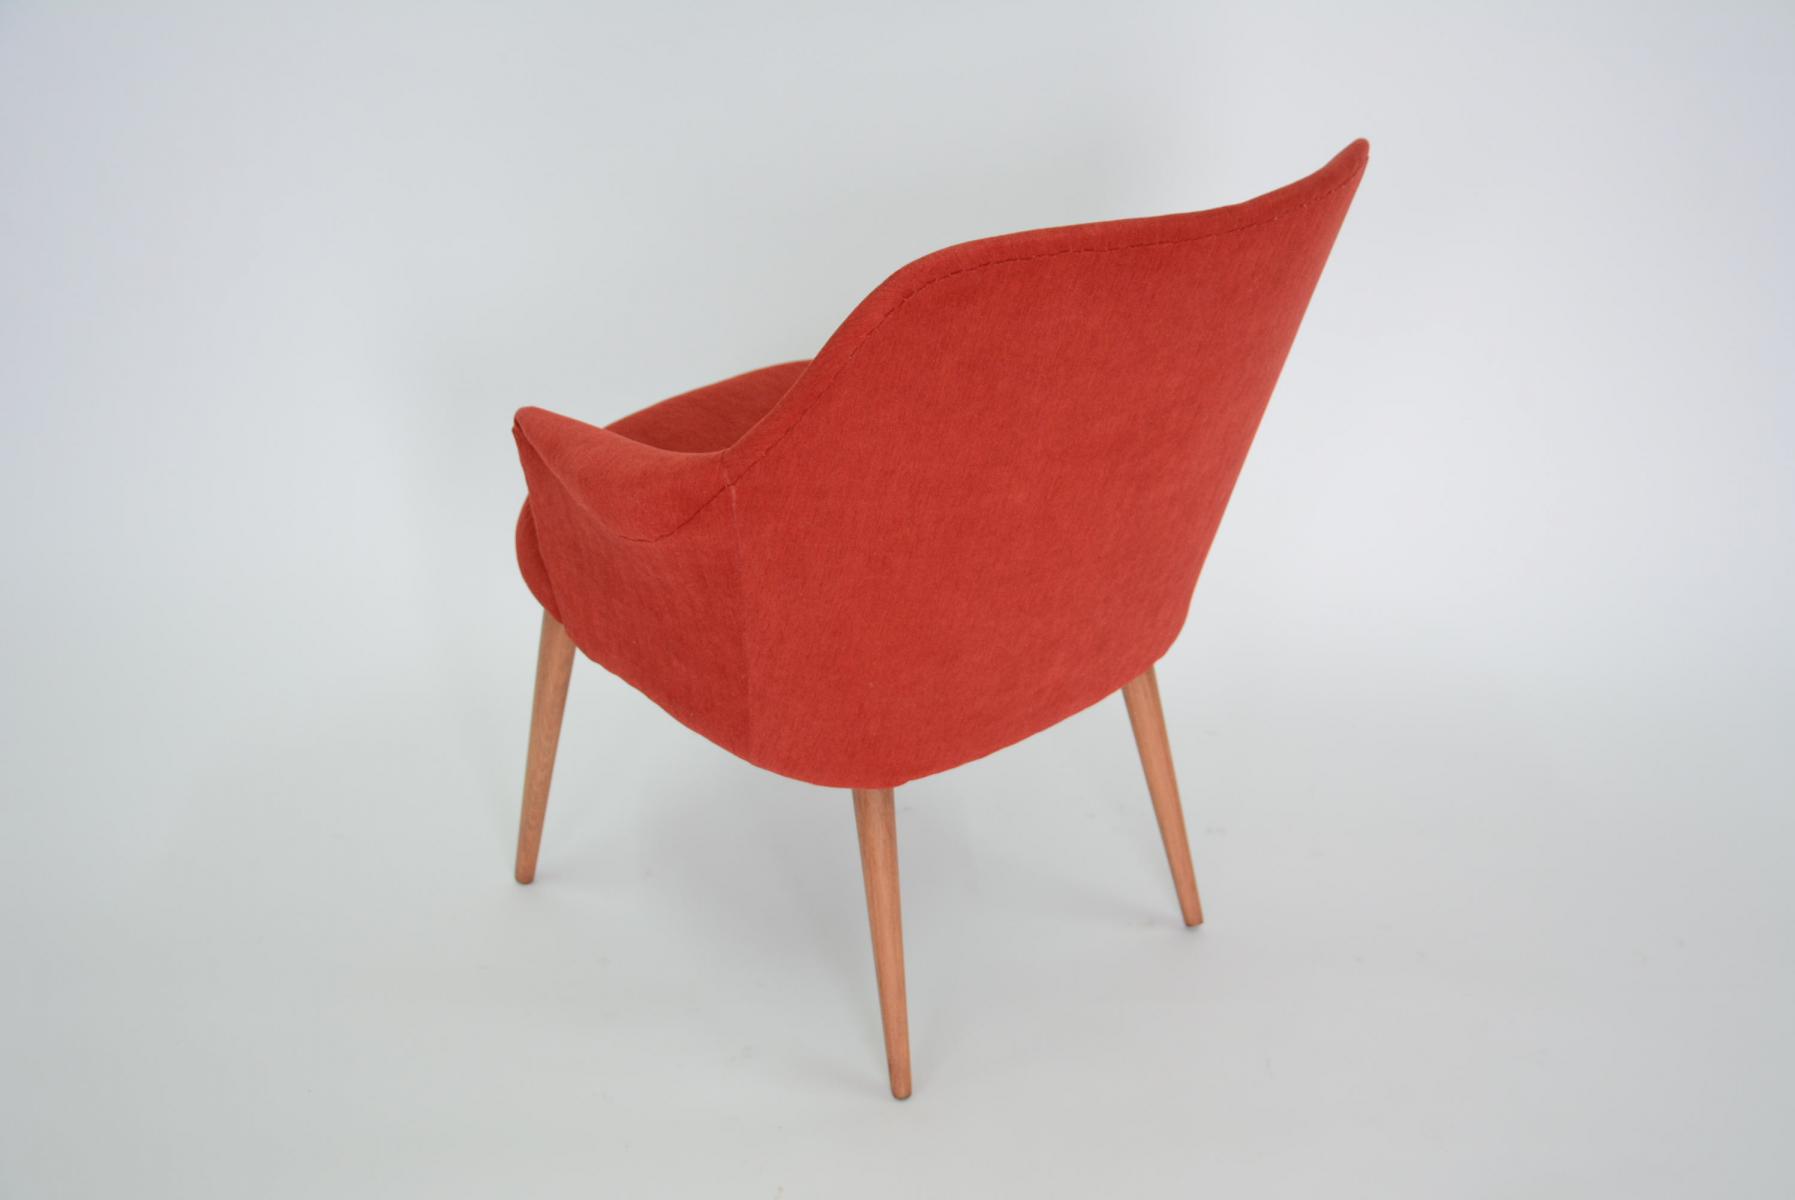 Vintage German Red Tulip Chair, 1970s for sale at Pamono